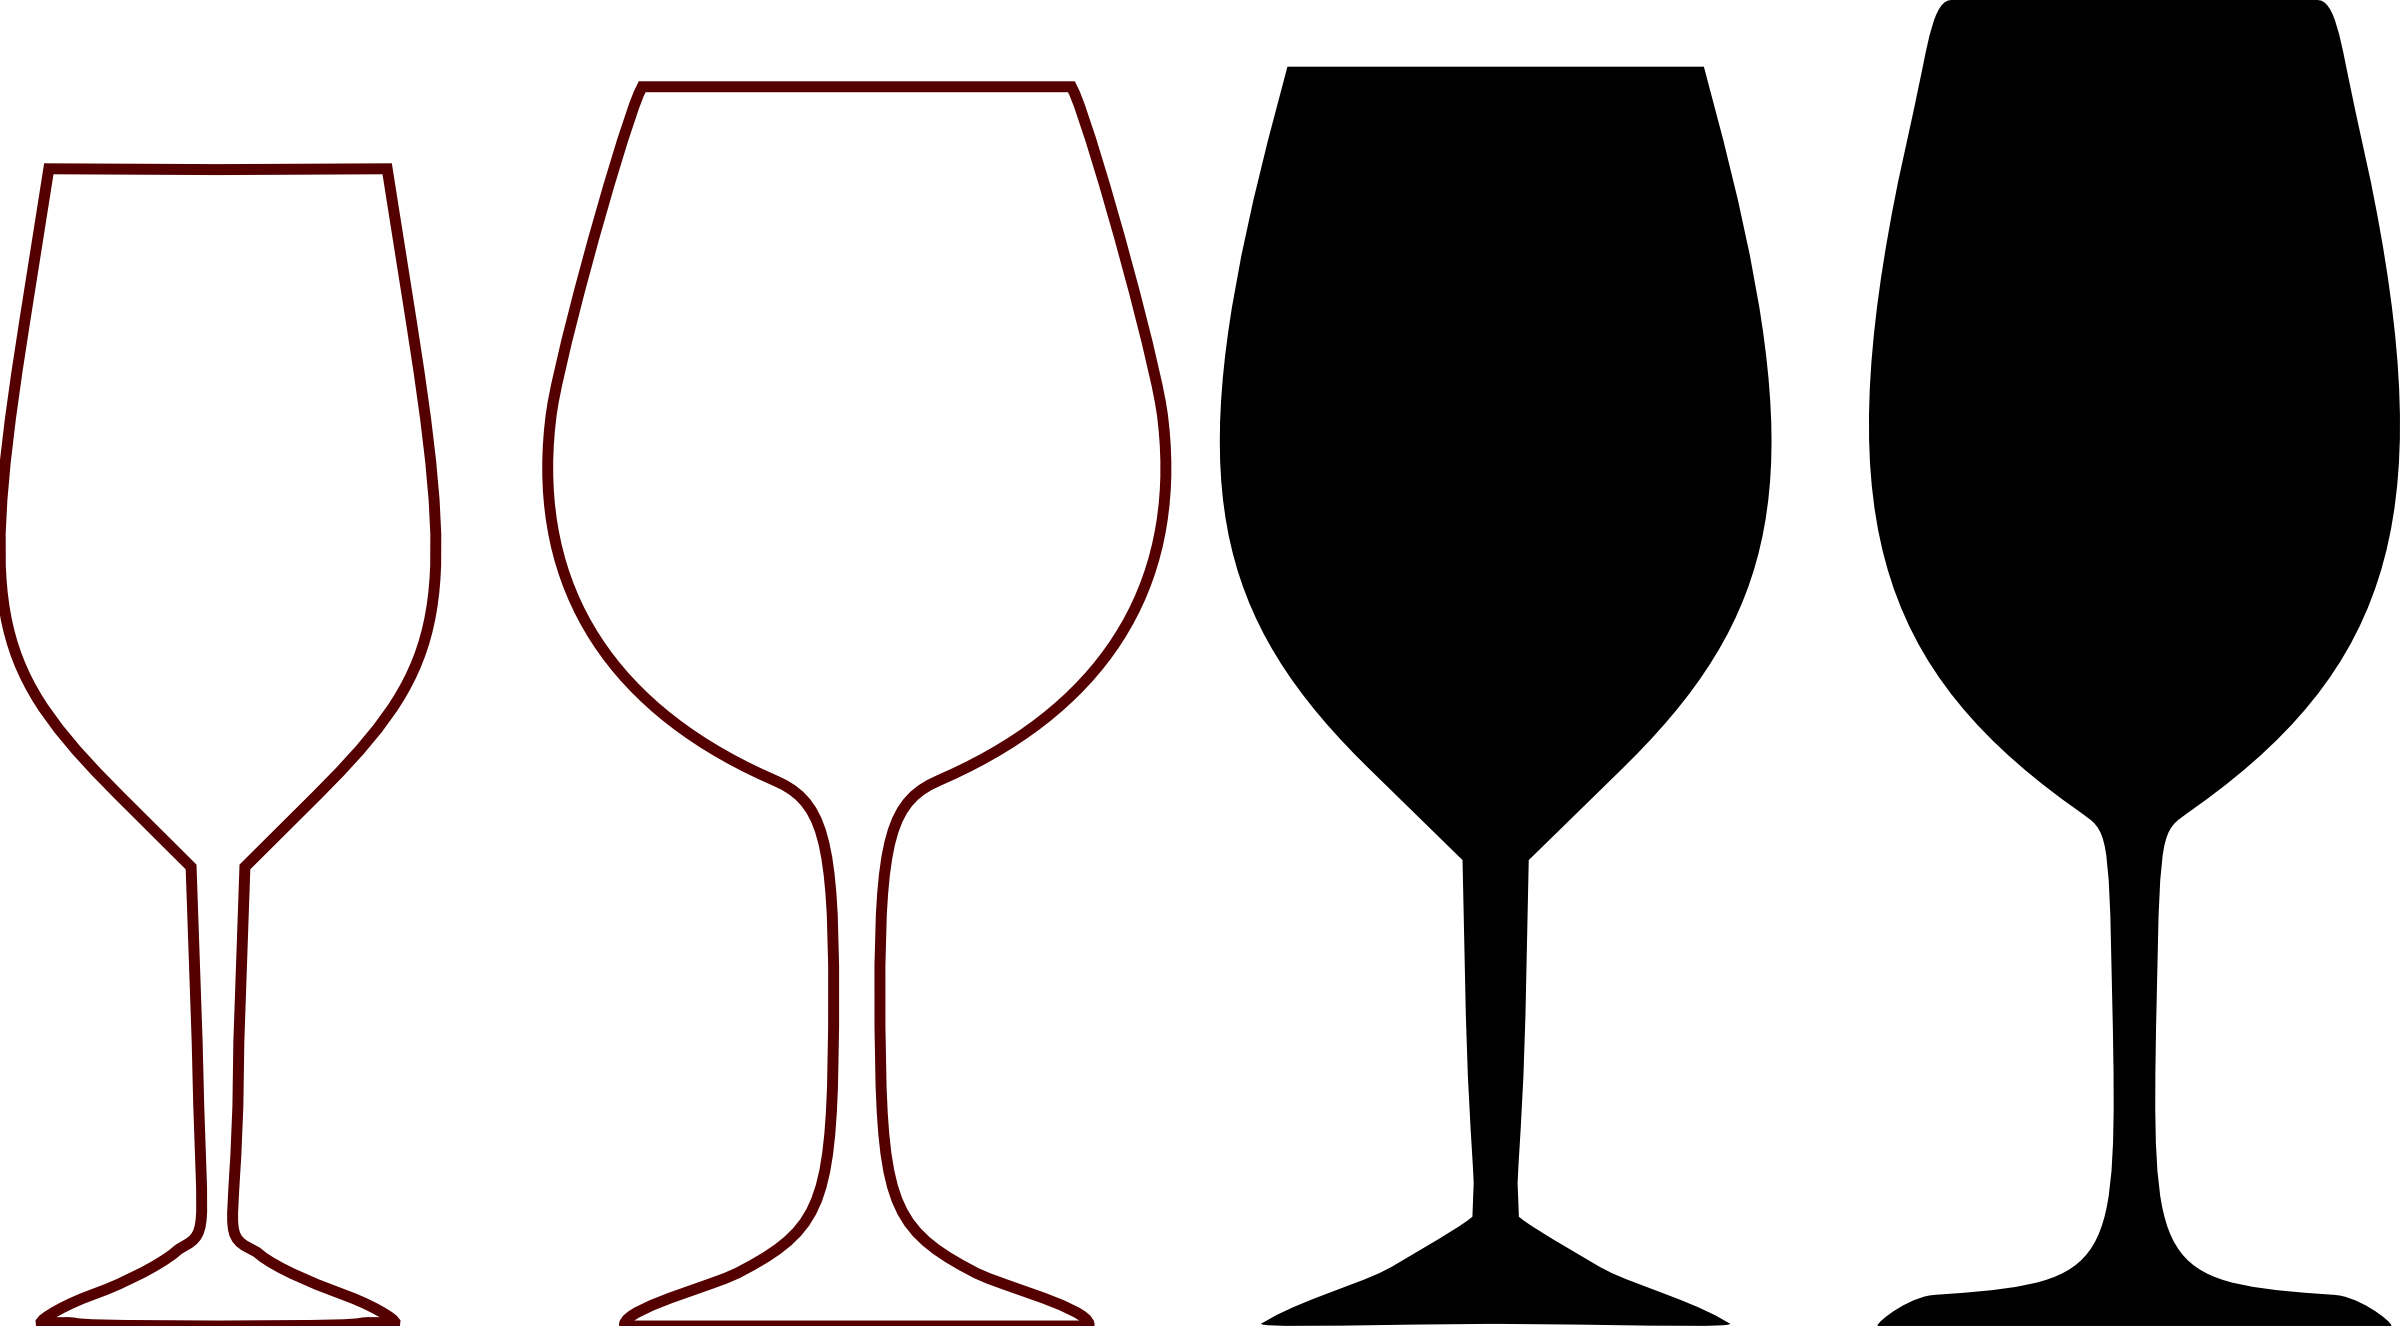 Wine glasses clip art hostted - Cliparting.com